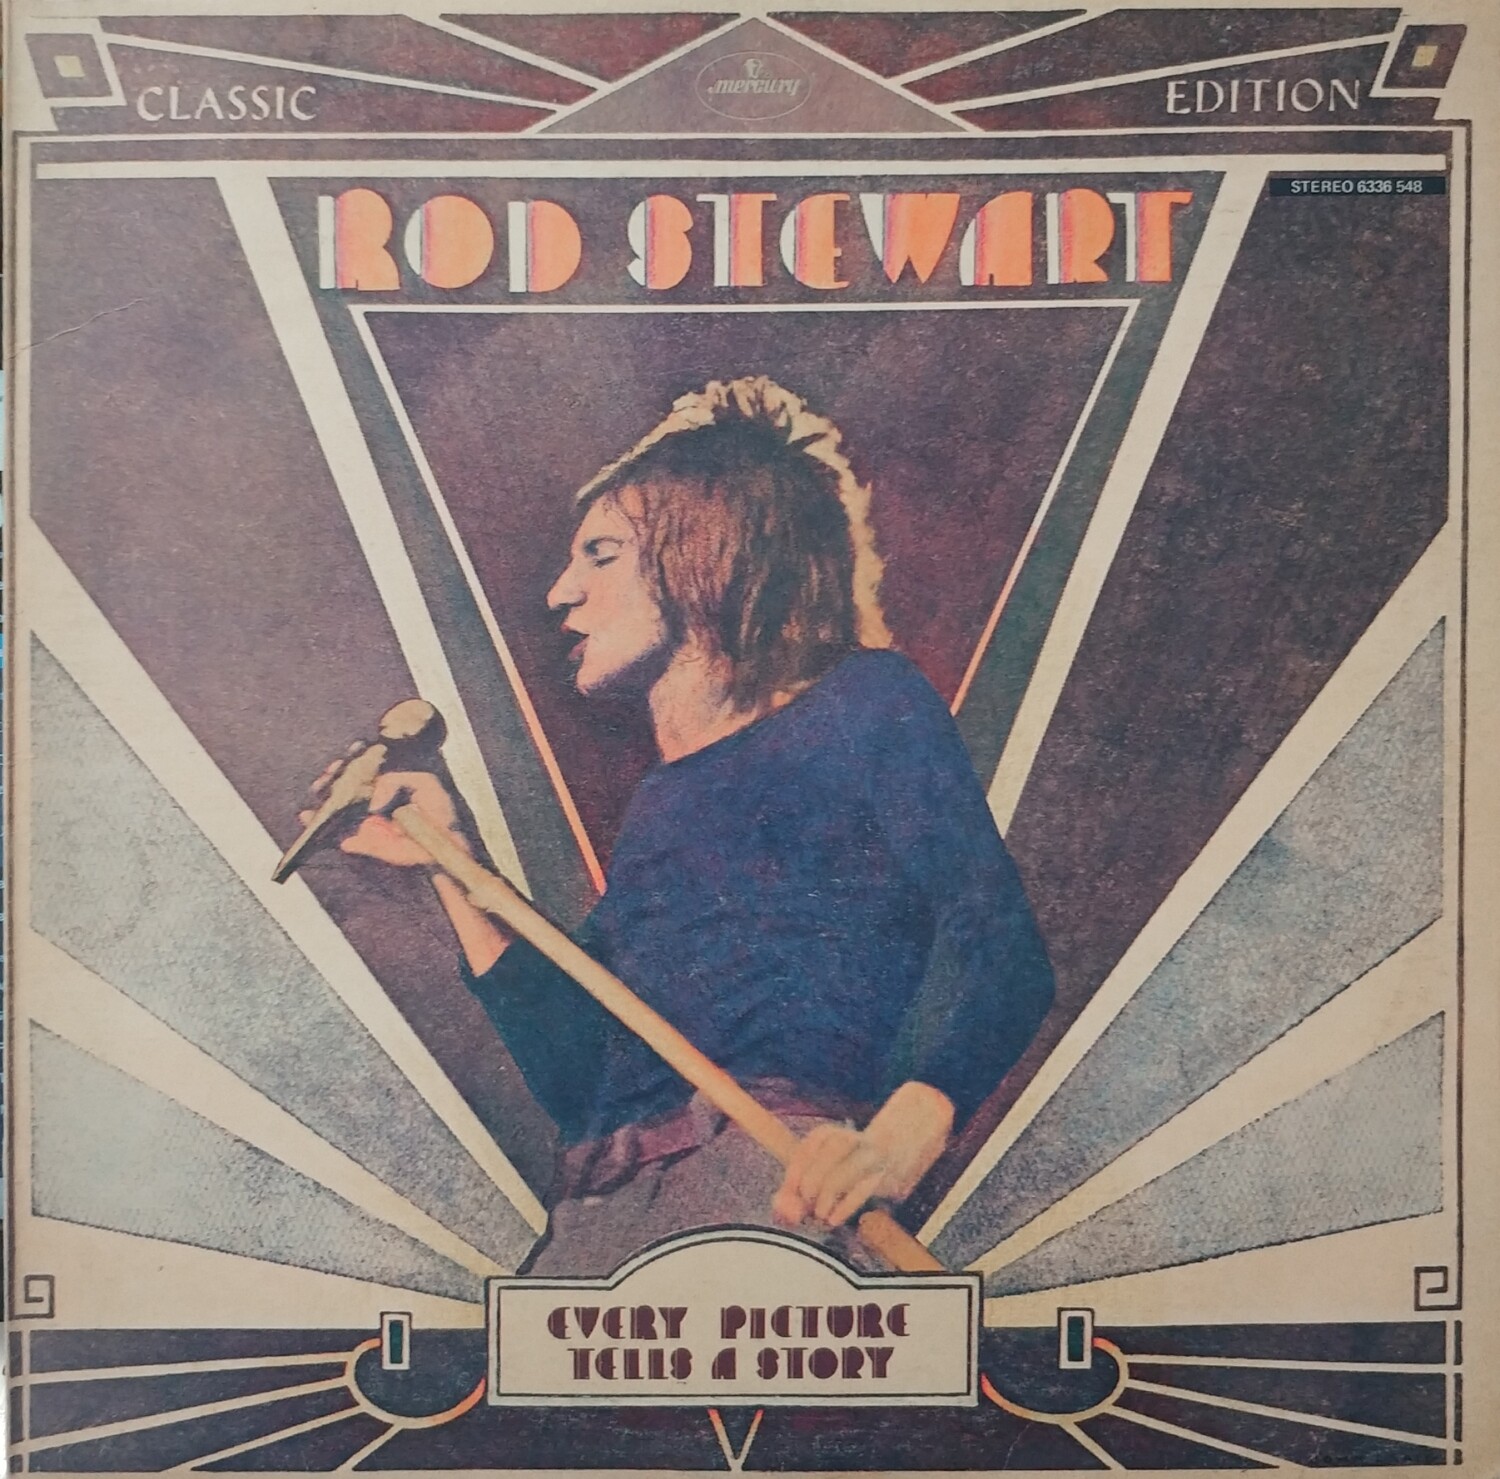 Rod Stewart - Every Picture tells a story